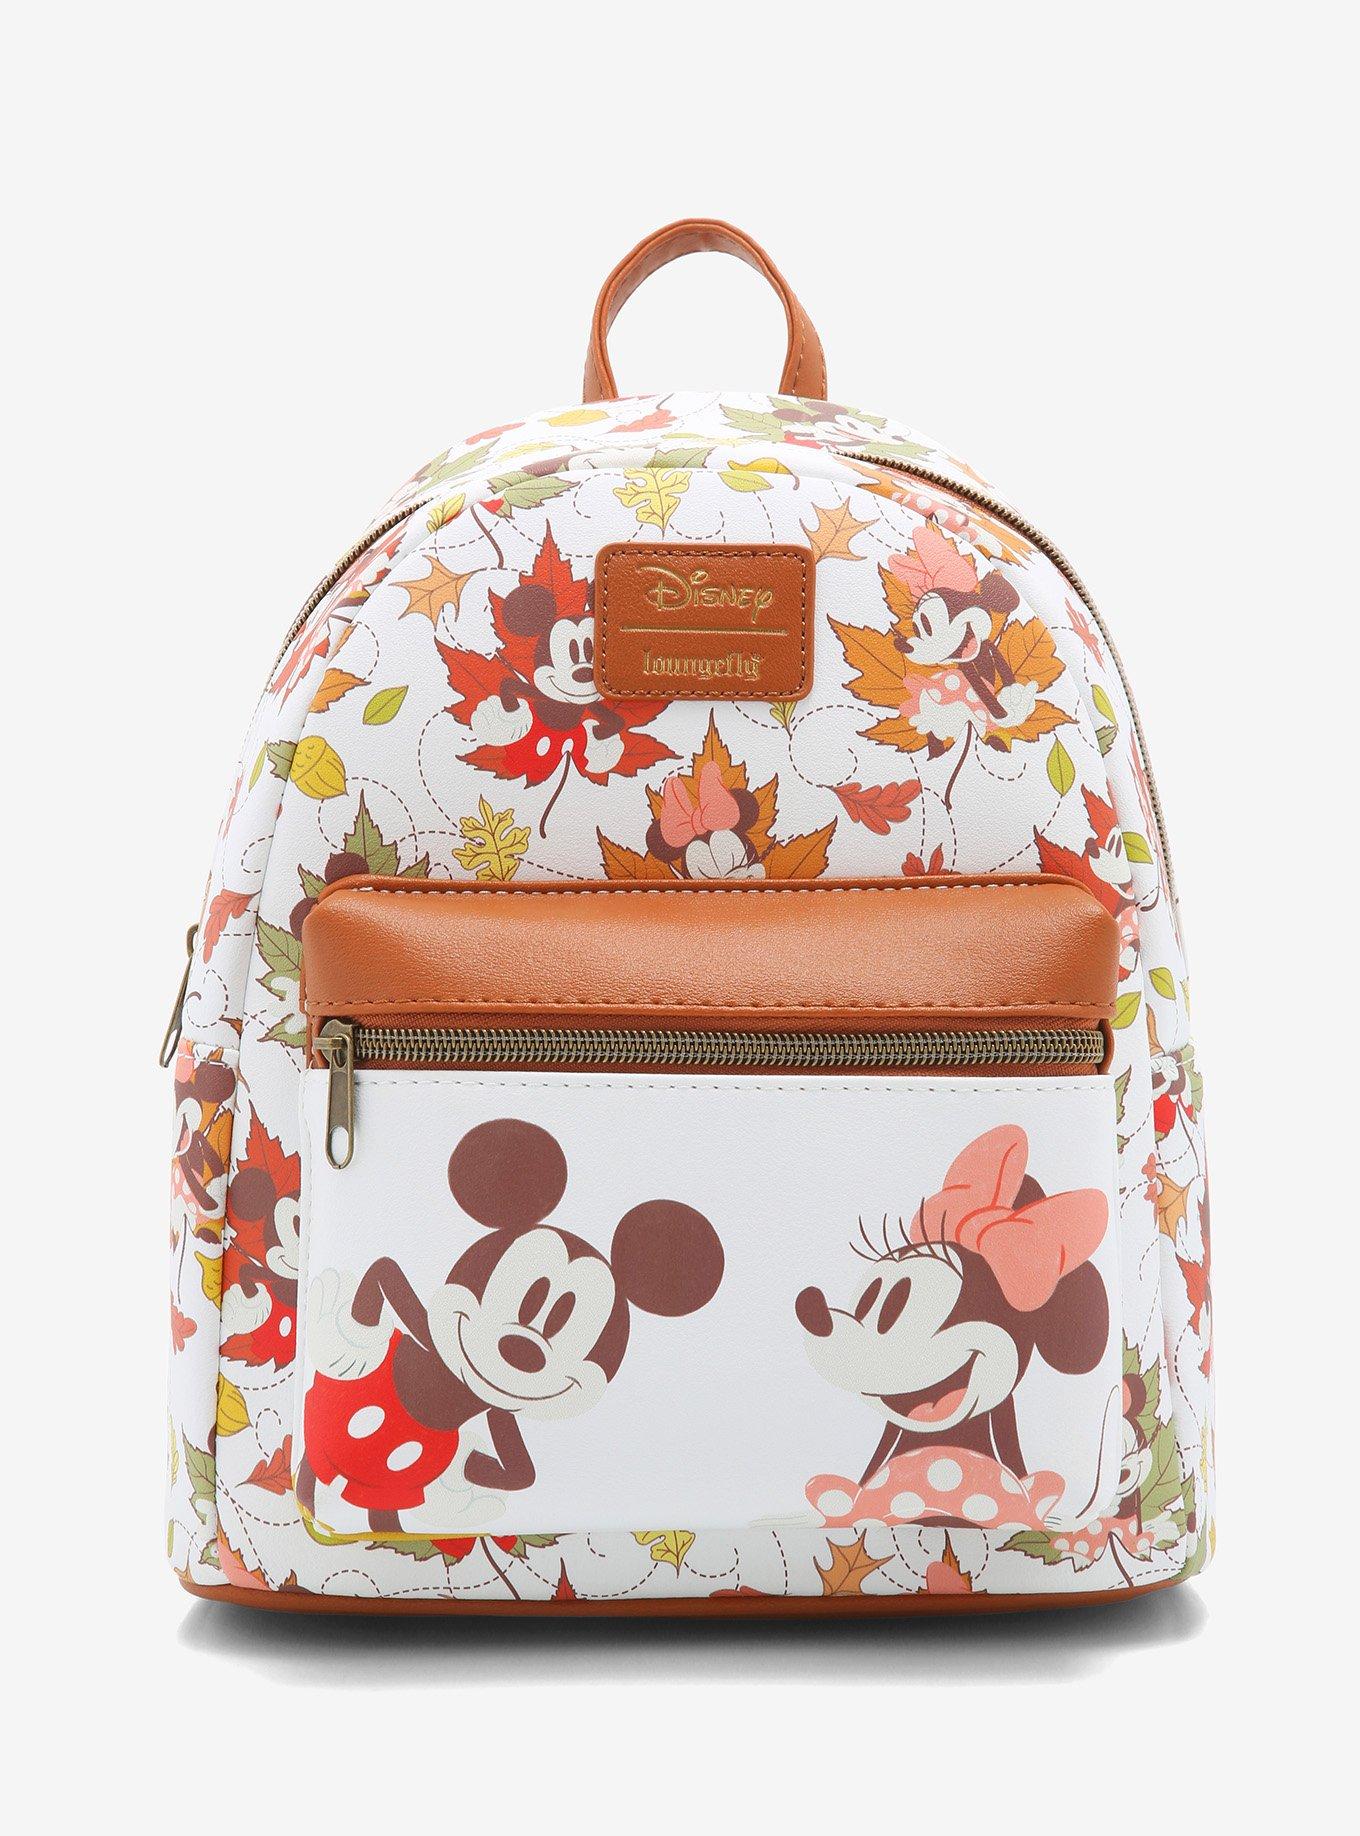 MINNIE MOUSE RED TONAL COSPLAY MINI BACKPACK - DISNEY